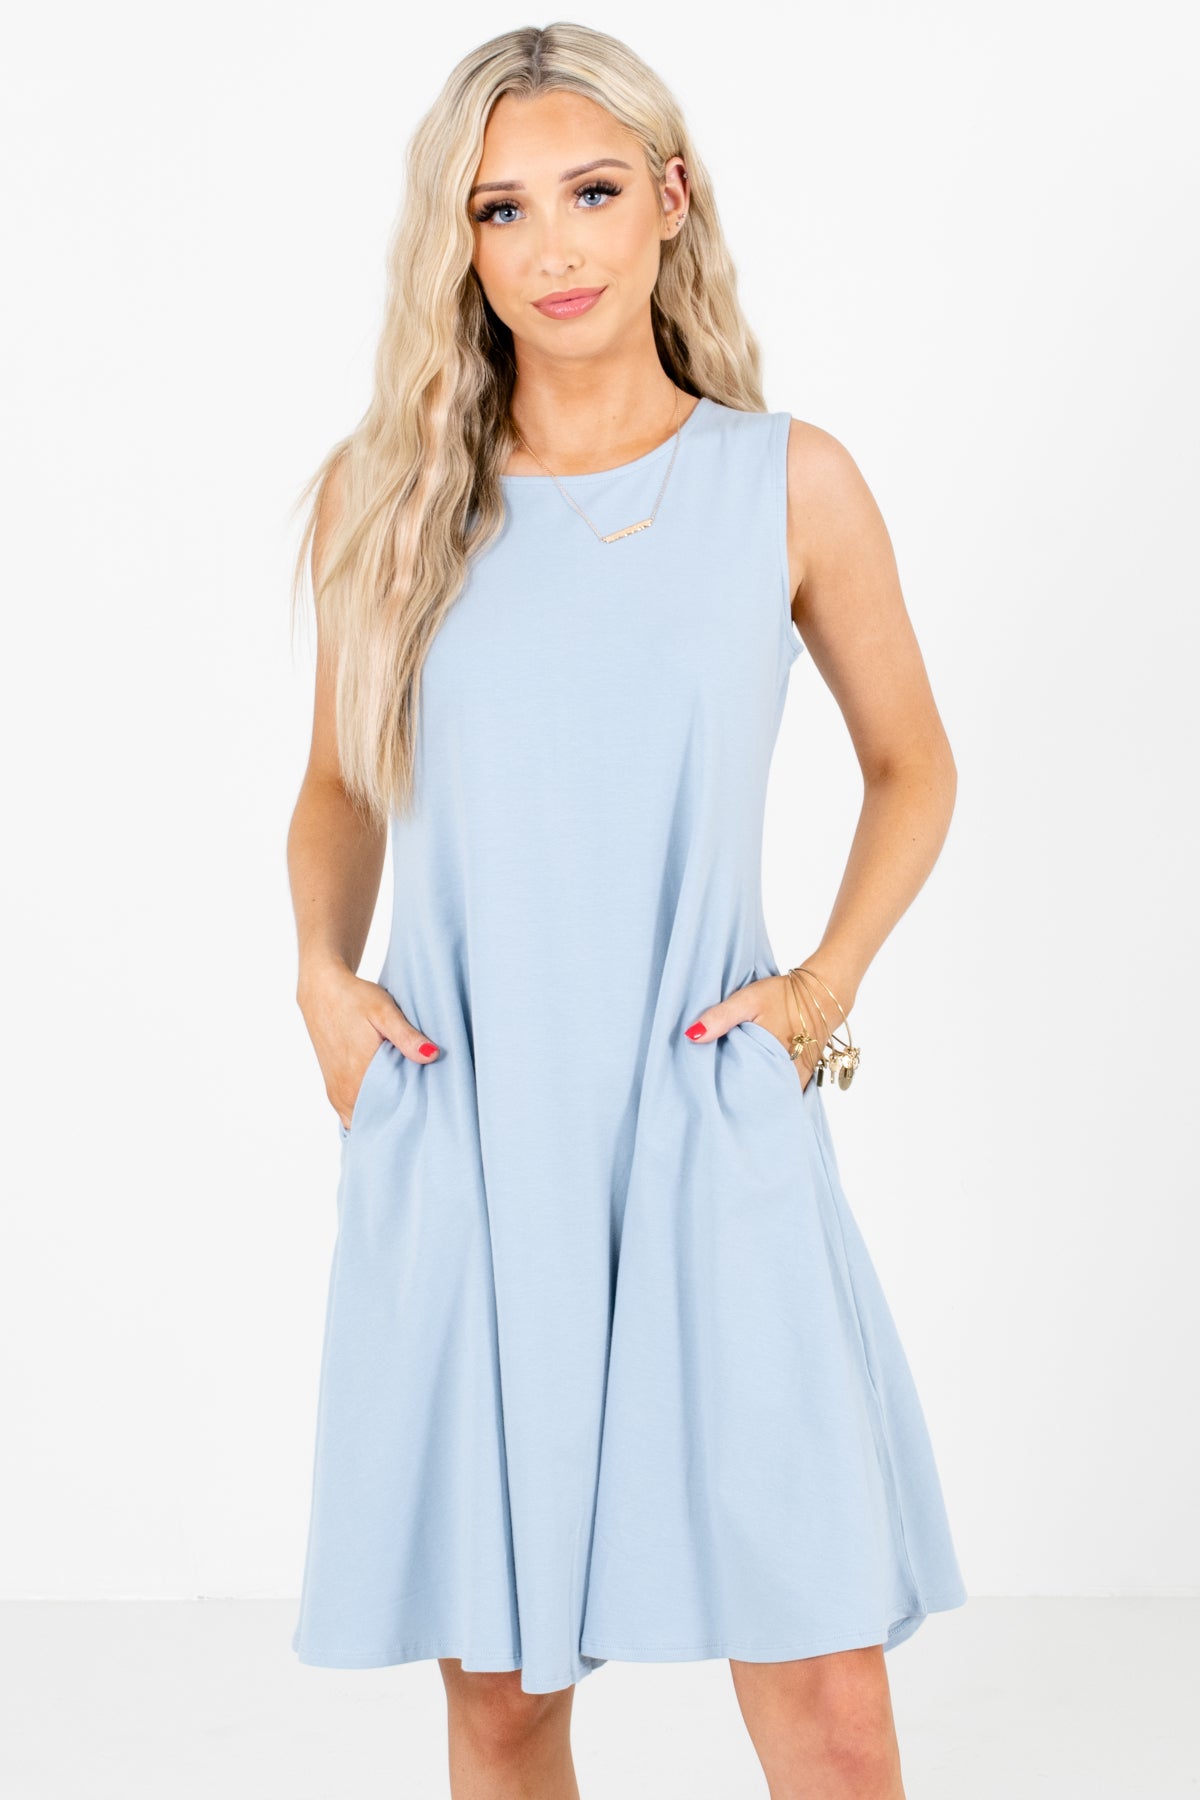 Light Blue Cute and Comfortable Boutique Knee-Length Dresses for Women